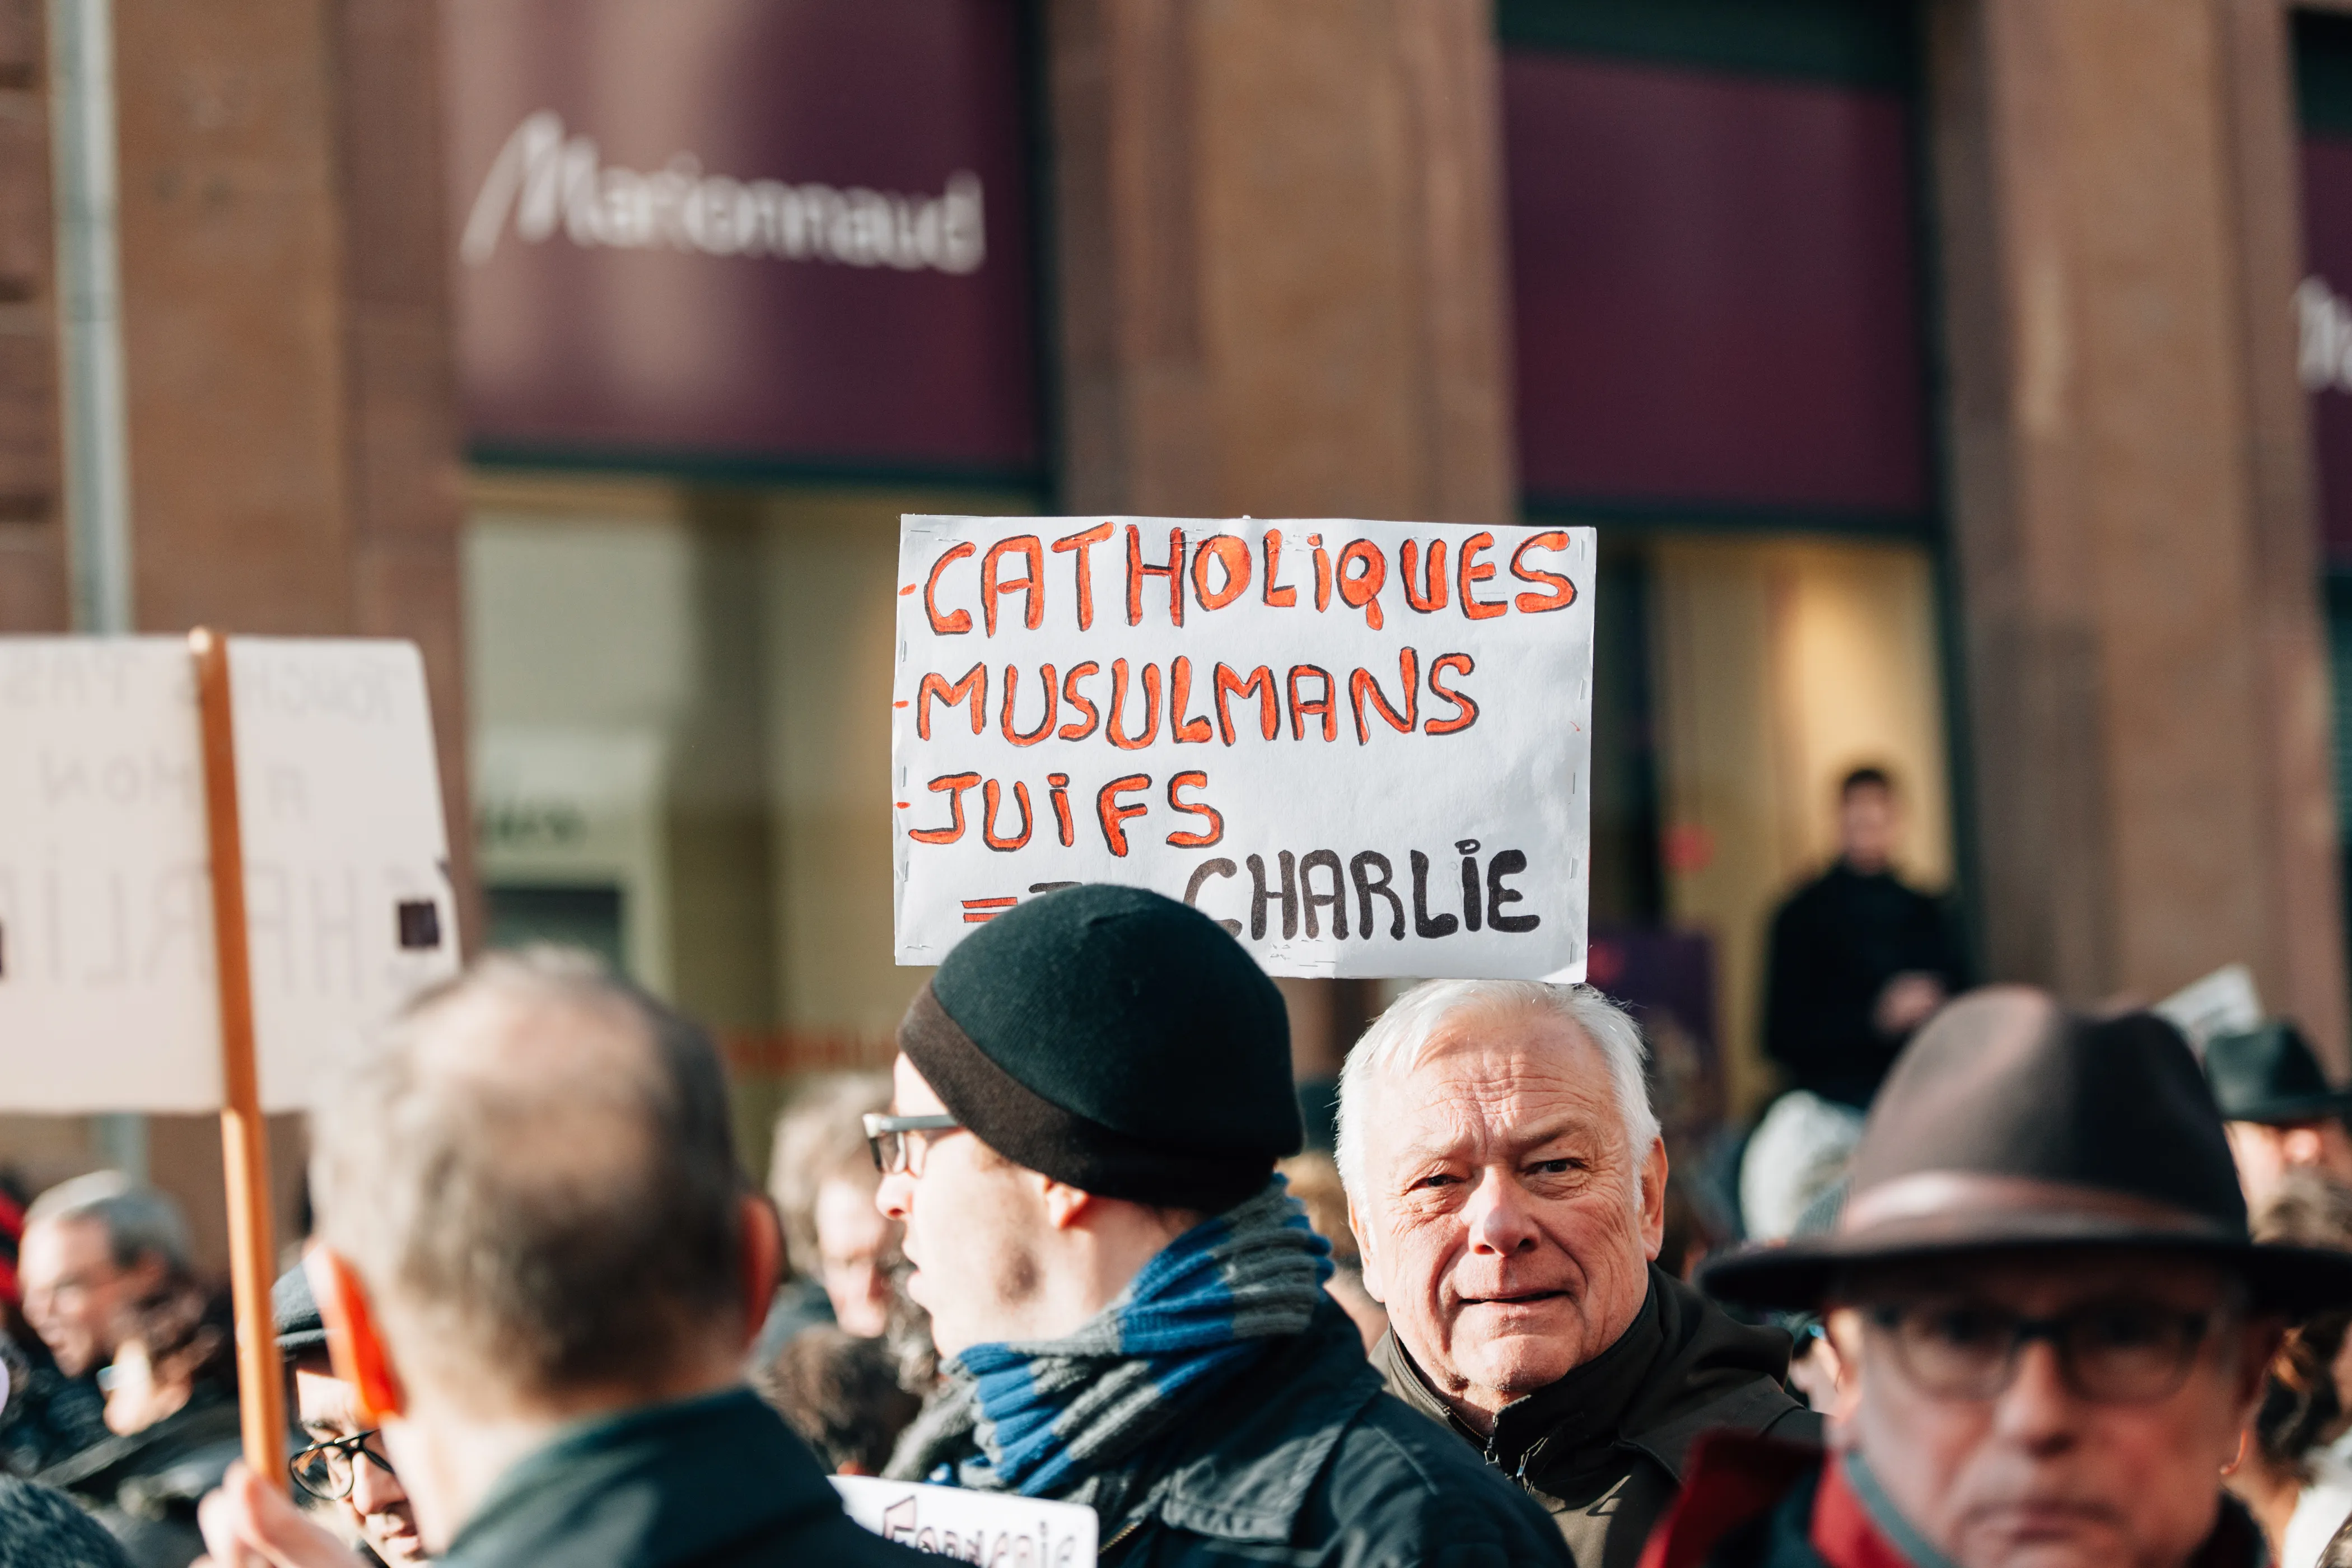 People in Strasbourg, France, hold placards reading "Catholics, muslims, jews all are Charlie" during a unity rally on Jan. 11, 2015 following a mass shooting by Muslim terrorists at the offices of the French satirical weekly newspaper Charlie Hebdo in Paris.?w=200&h=150